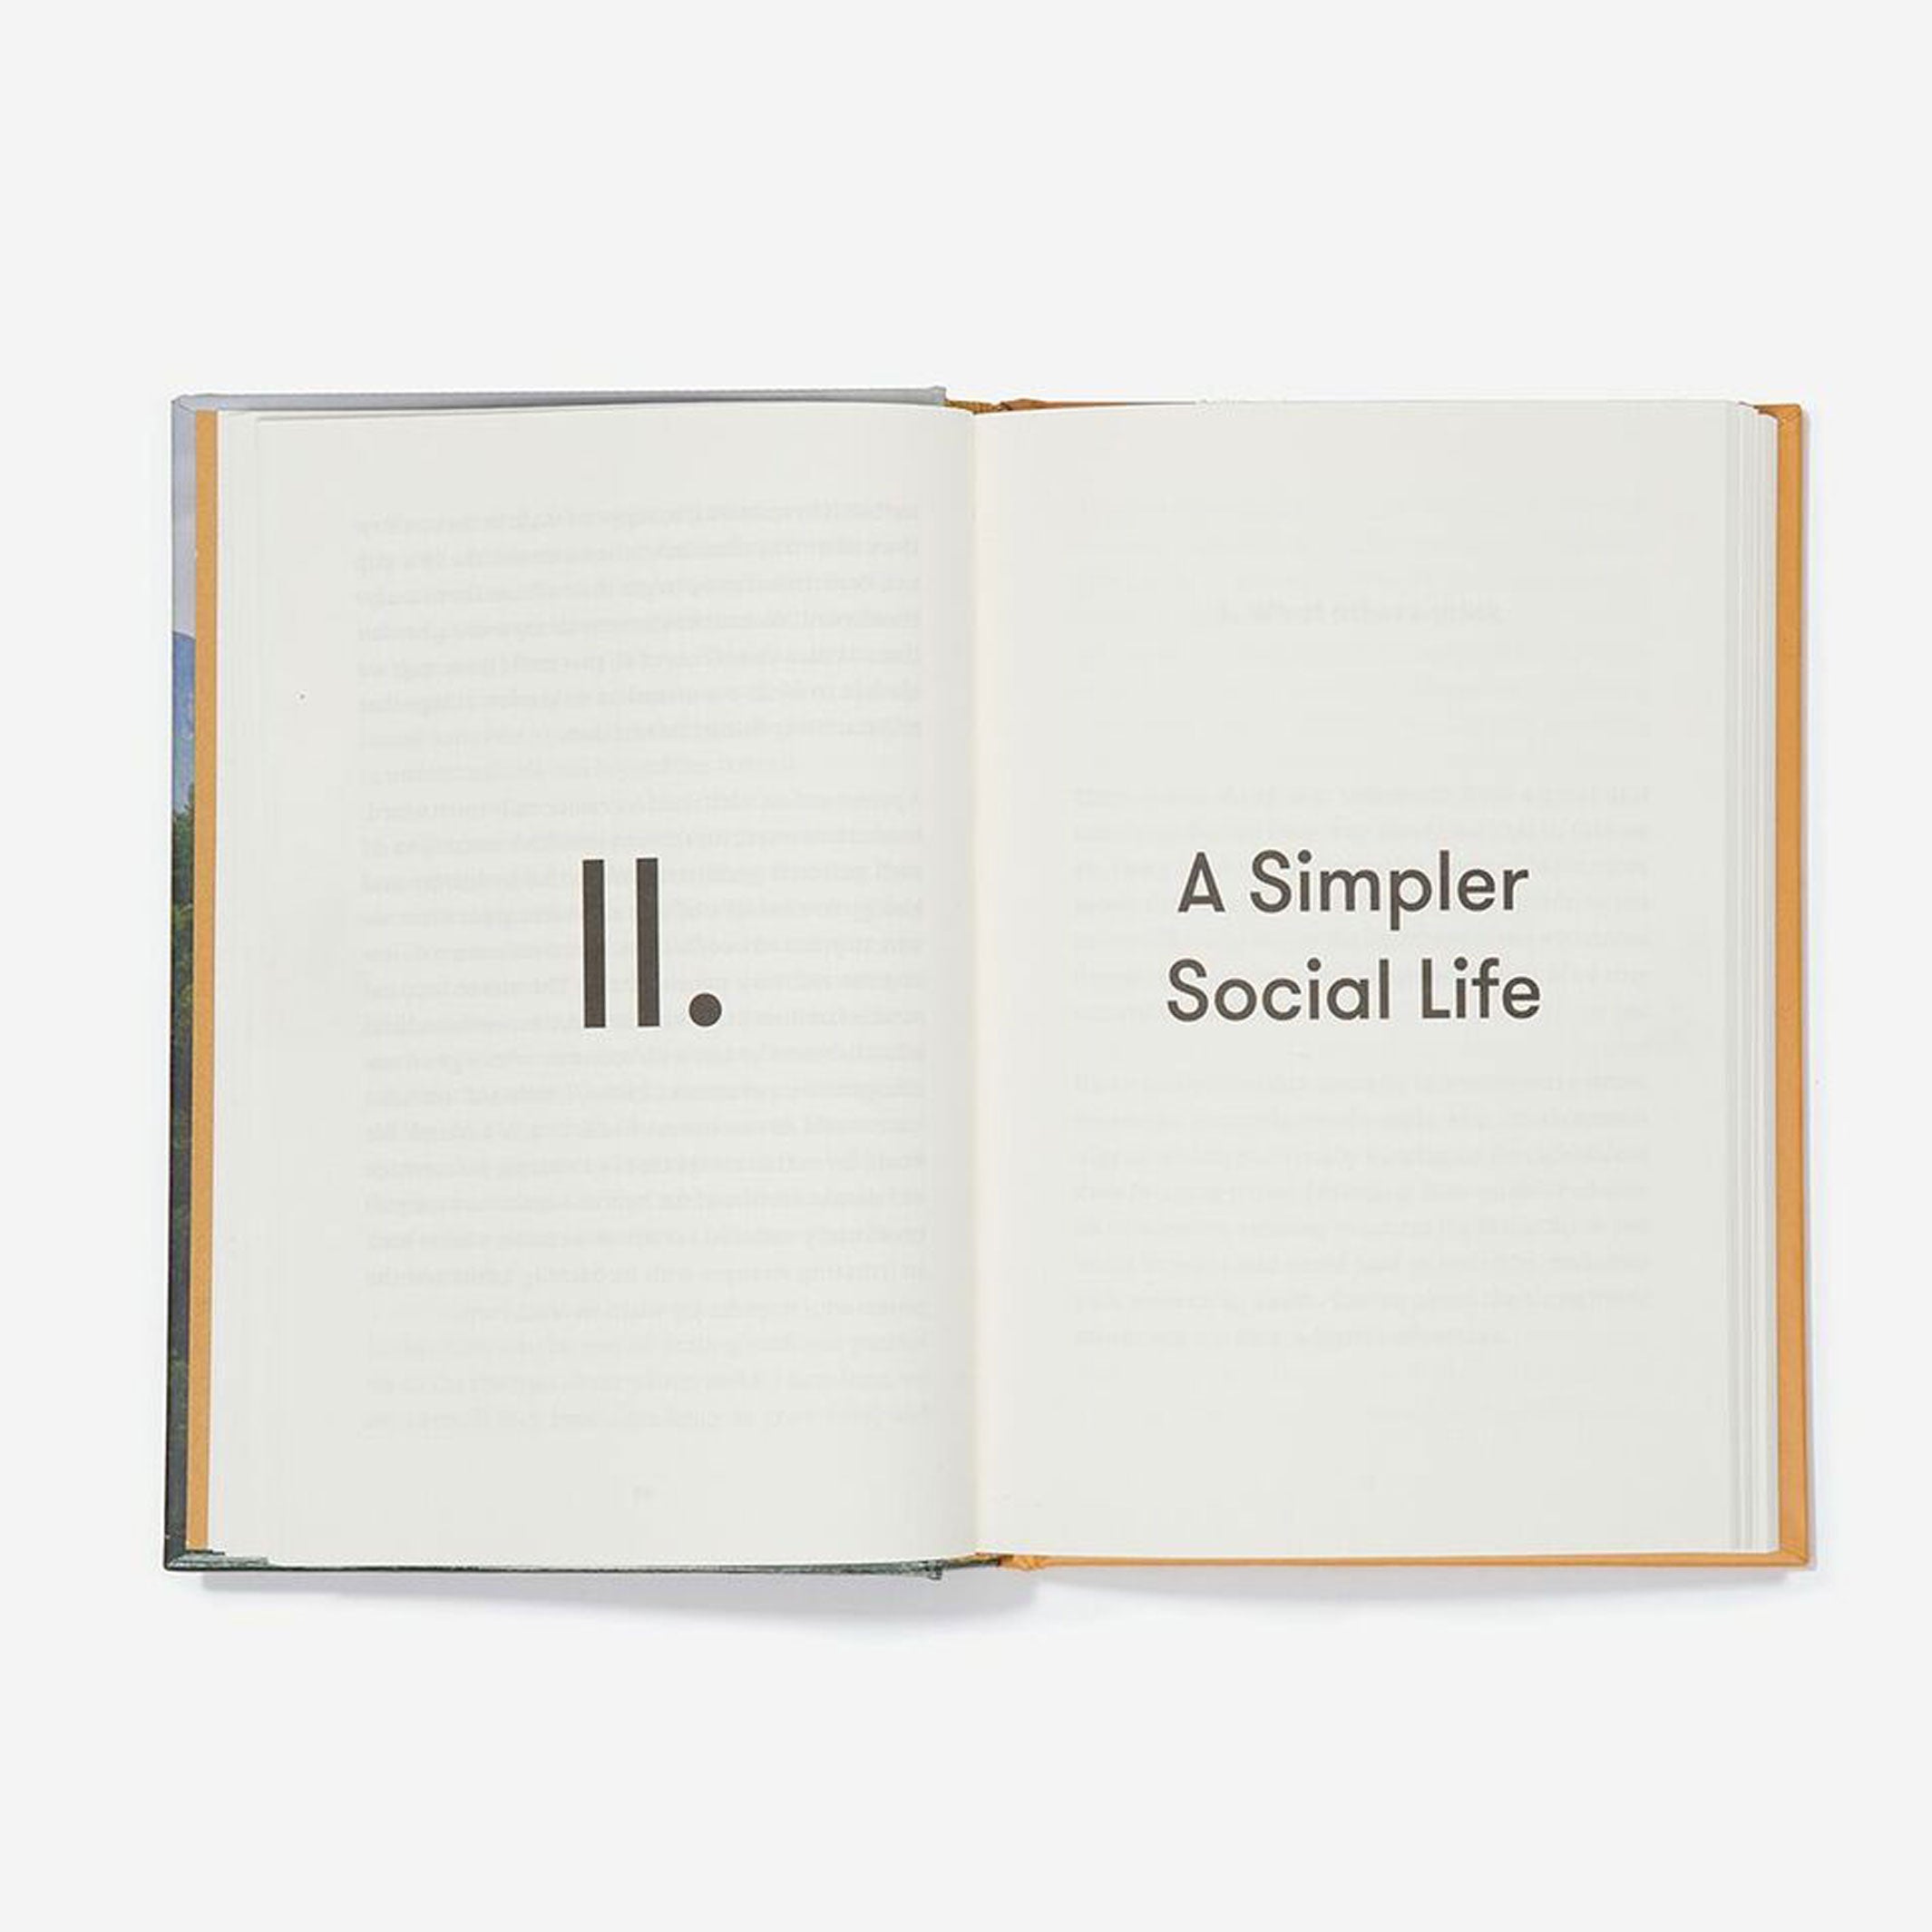 A SIMPLER LIFE | BUCH | English Edition | The School of Life